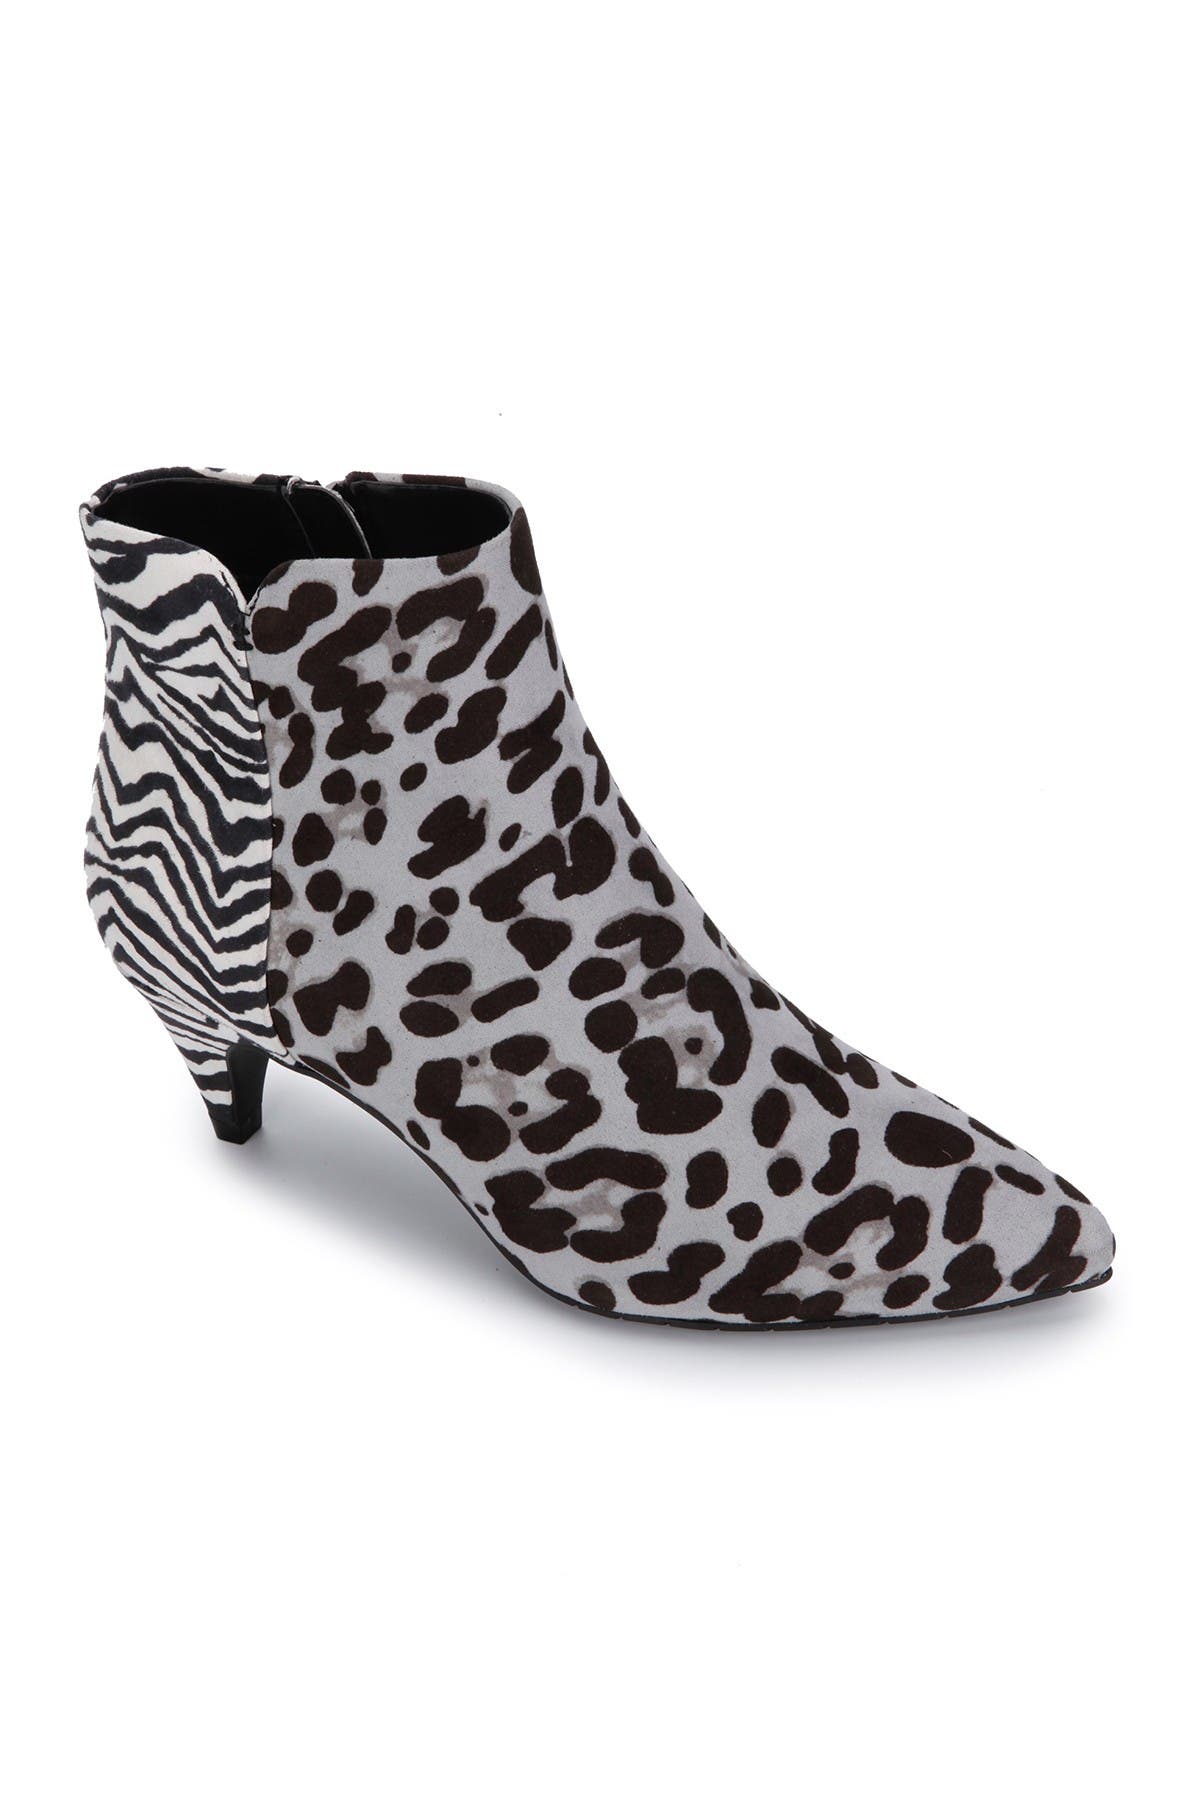 kenneth cole reaction leopard booties